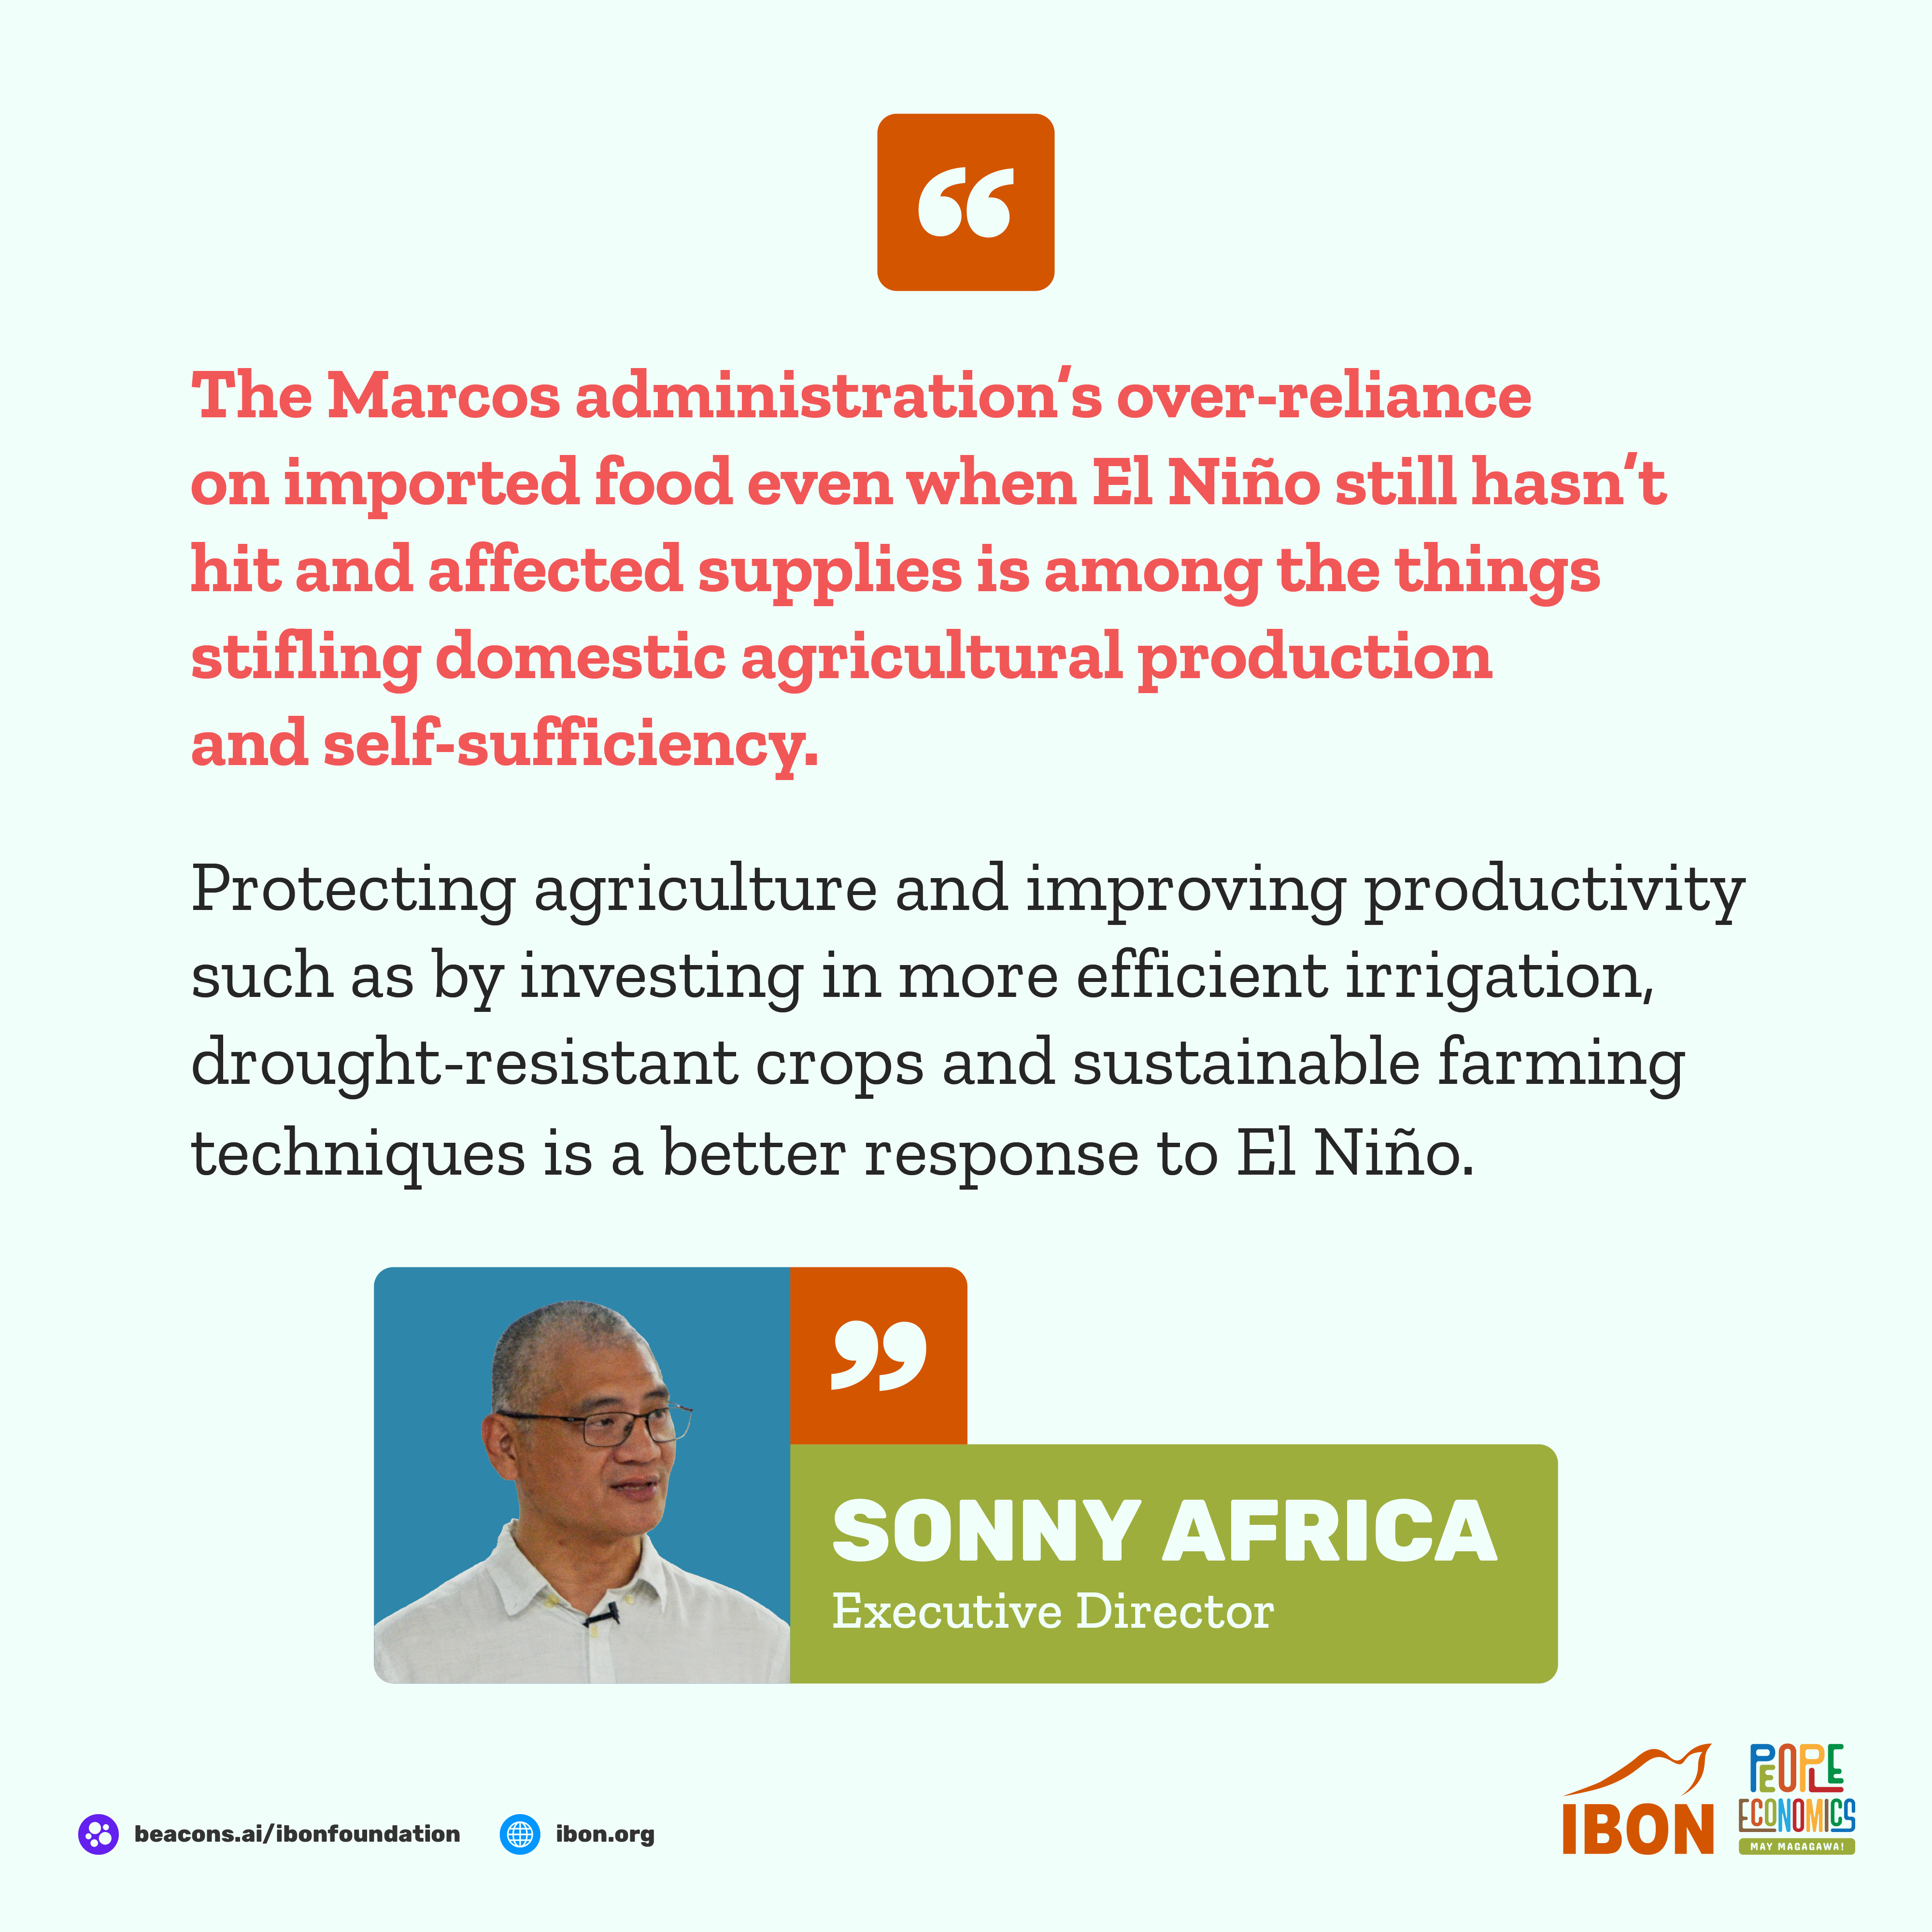 IBON executive director on EO 50 extending lower tariffs on rice, corn and meat products:

"The Marcos administration’s over-reliance on imported food even when El Niño still hasn’t hit and affected supplies is among the things stifling domestic agricultural production and self-sufficiency.

Protecting agriculture and improving productivity such as by investing in more efficient irrigation, drought-resistant crops and sustainable farming techniques is a better response to El Niño."